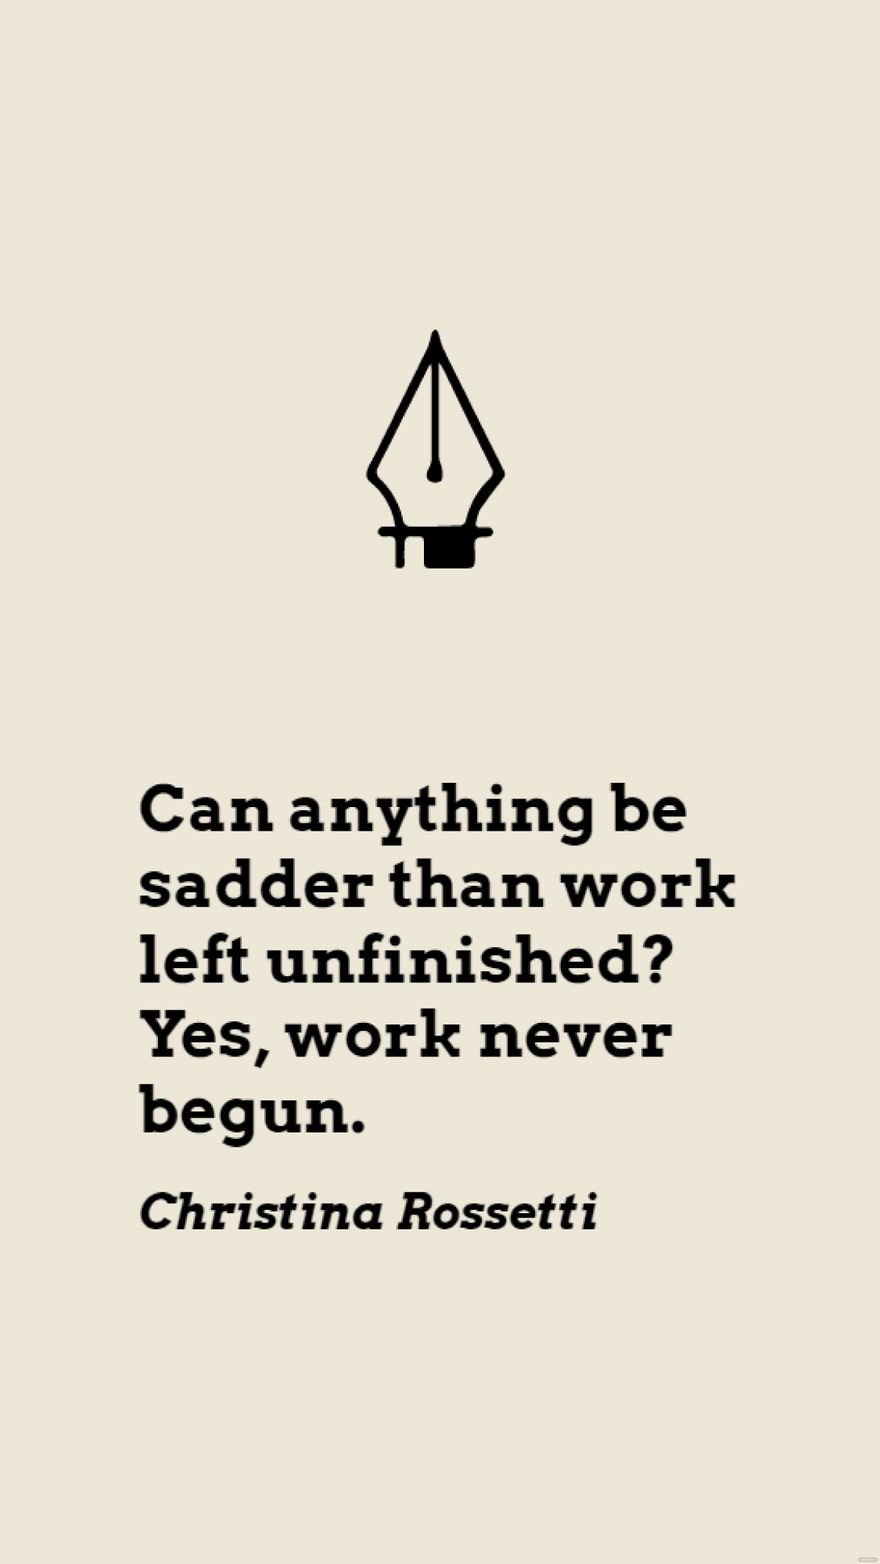 Christina Rossetti - Can anything be sadder than work left unfinished? Yes, work never begun. in JPG